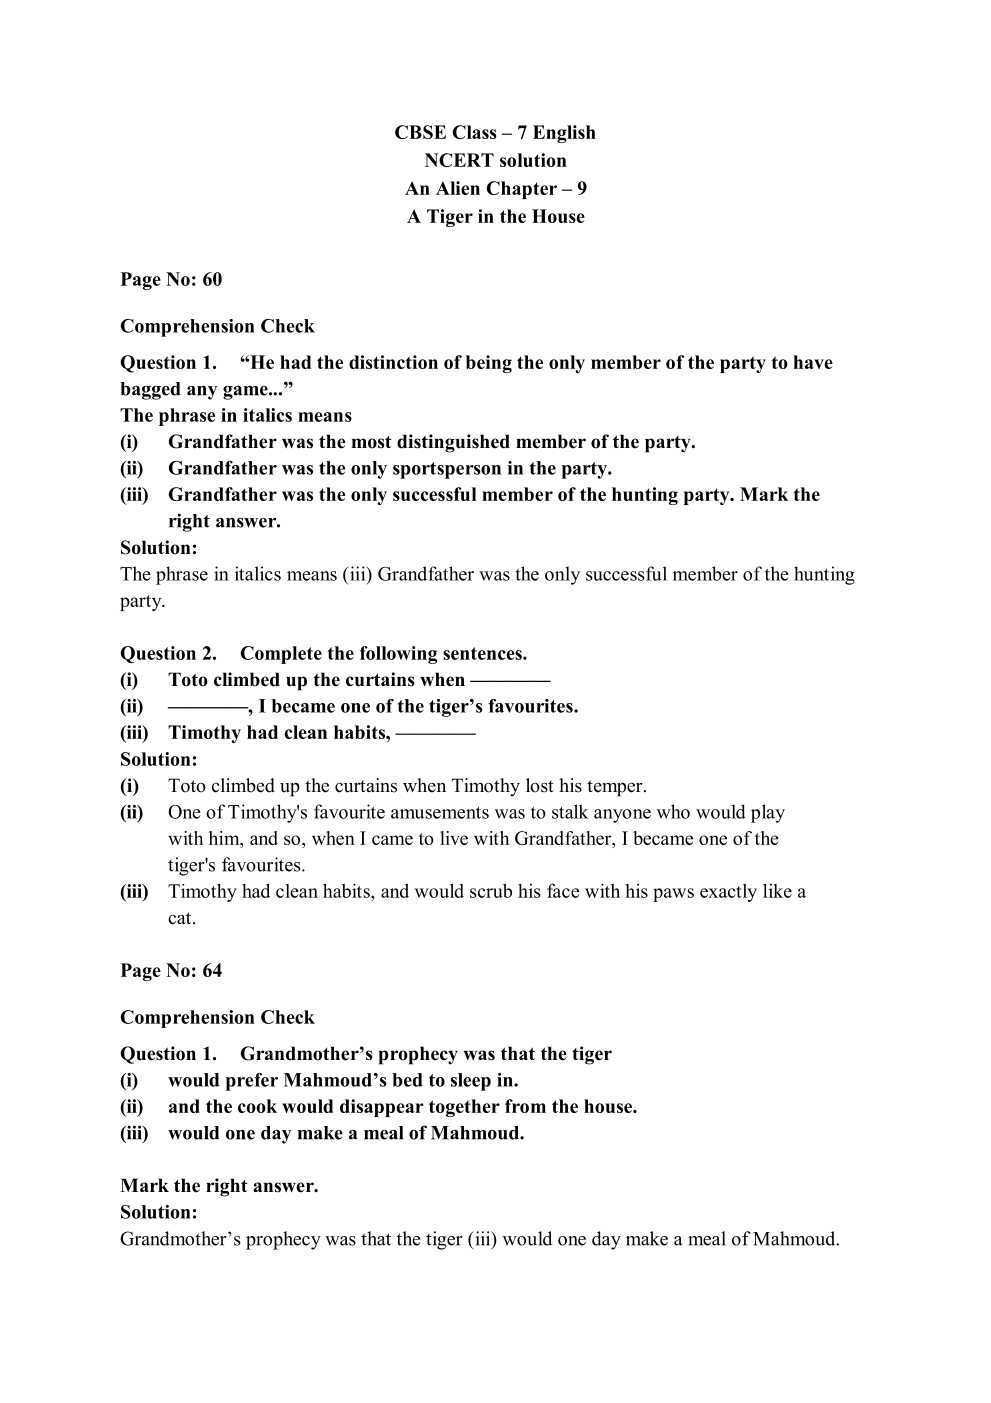 NCERT Solutions For Class 7 English An Alien Hand Chapter 9 A Tiger In The House